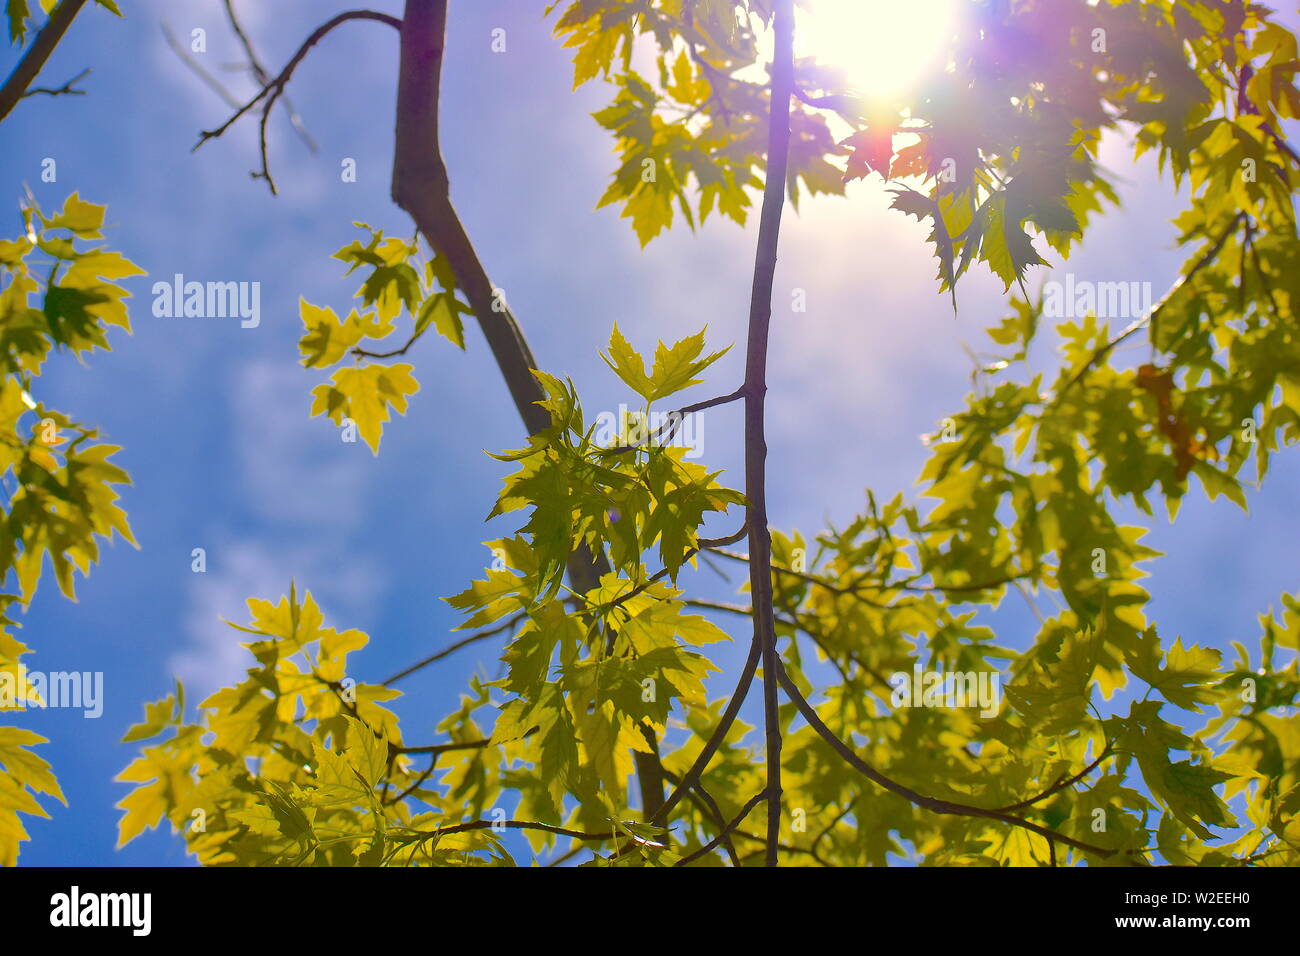 Ray of sun shining through thin branches creating a myriad of color Stock Photo